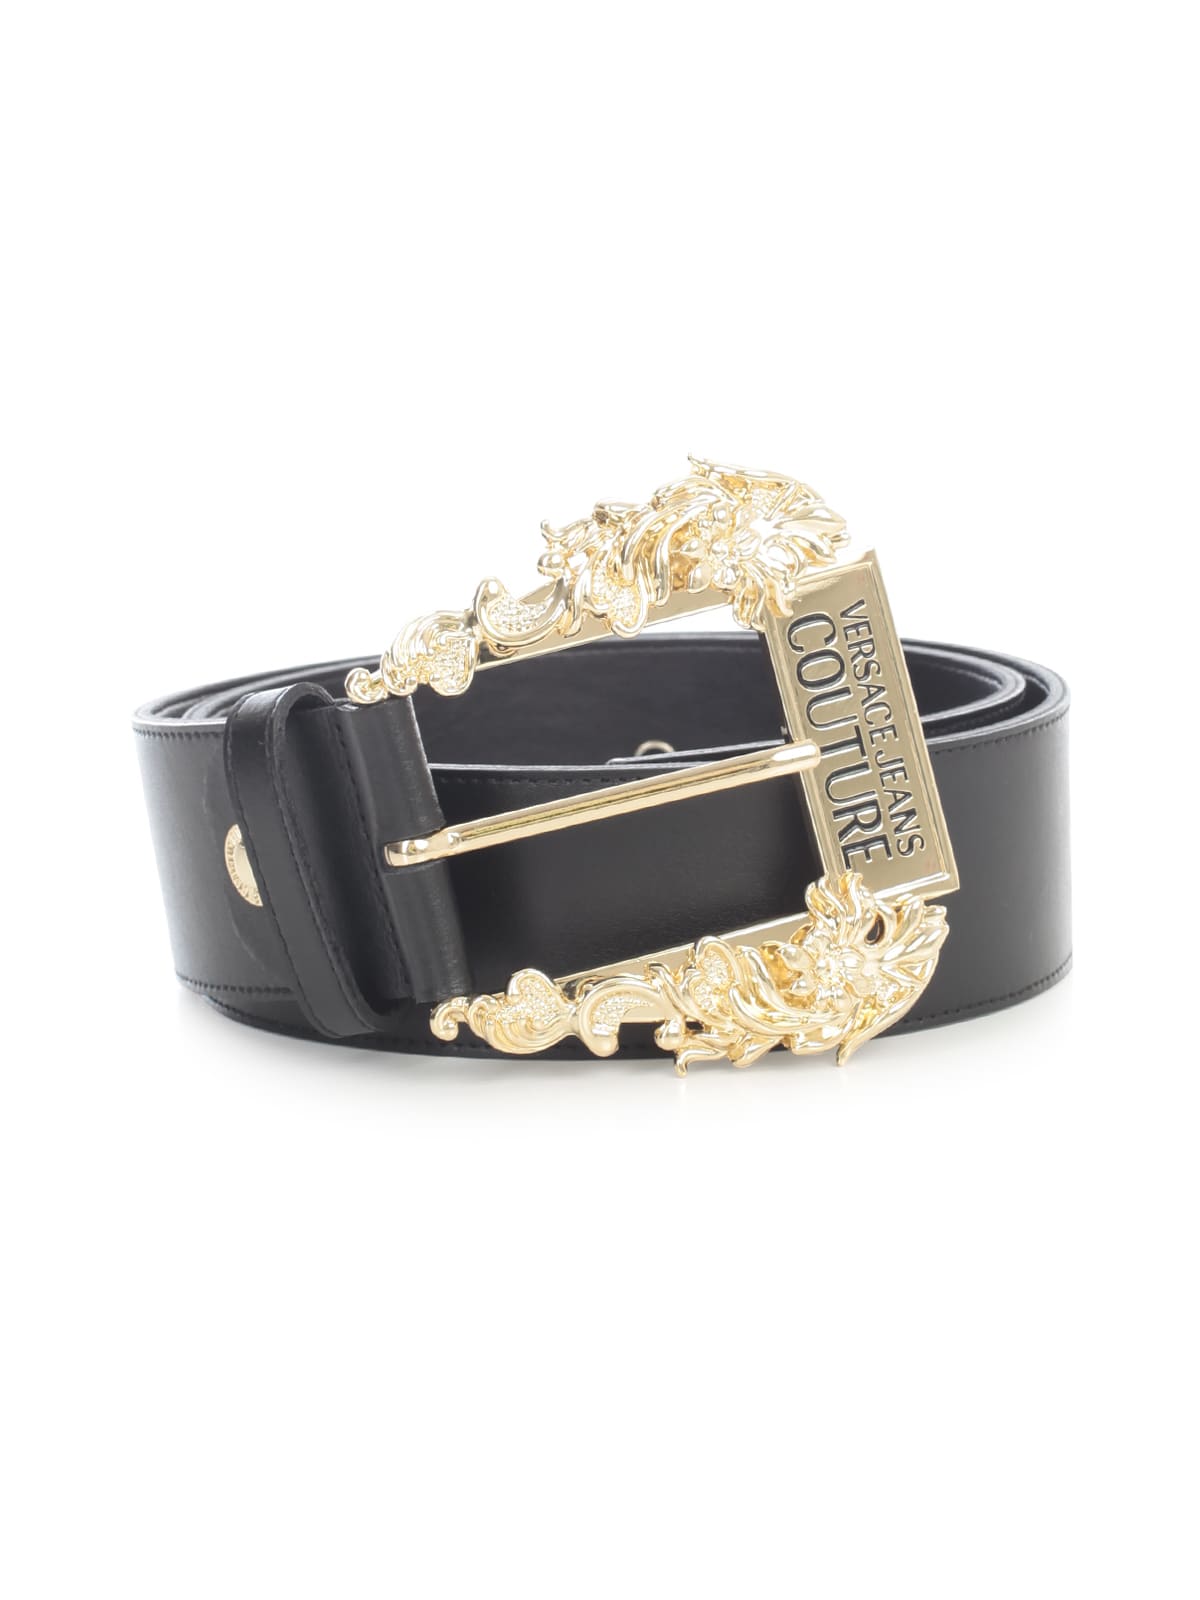 Versace Jeans Couture Printed Belt W/gold Buckle